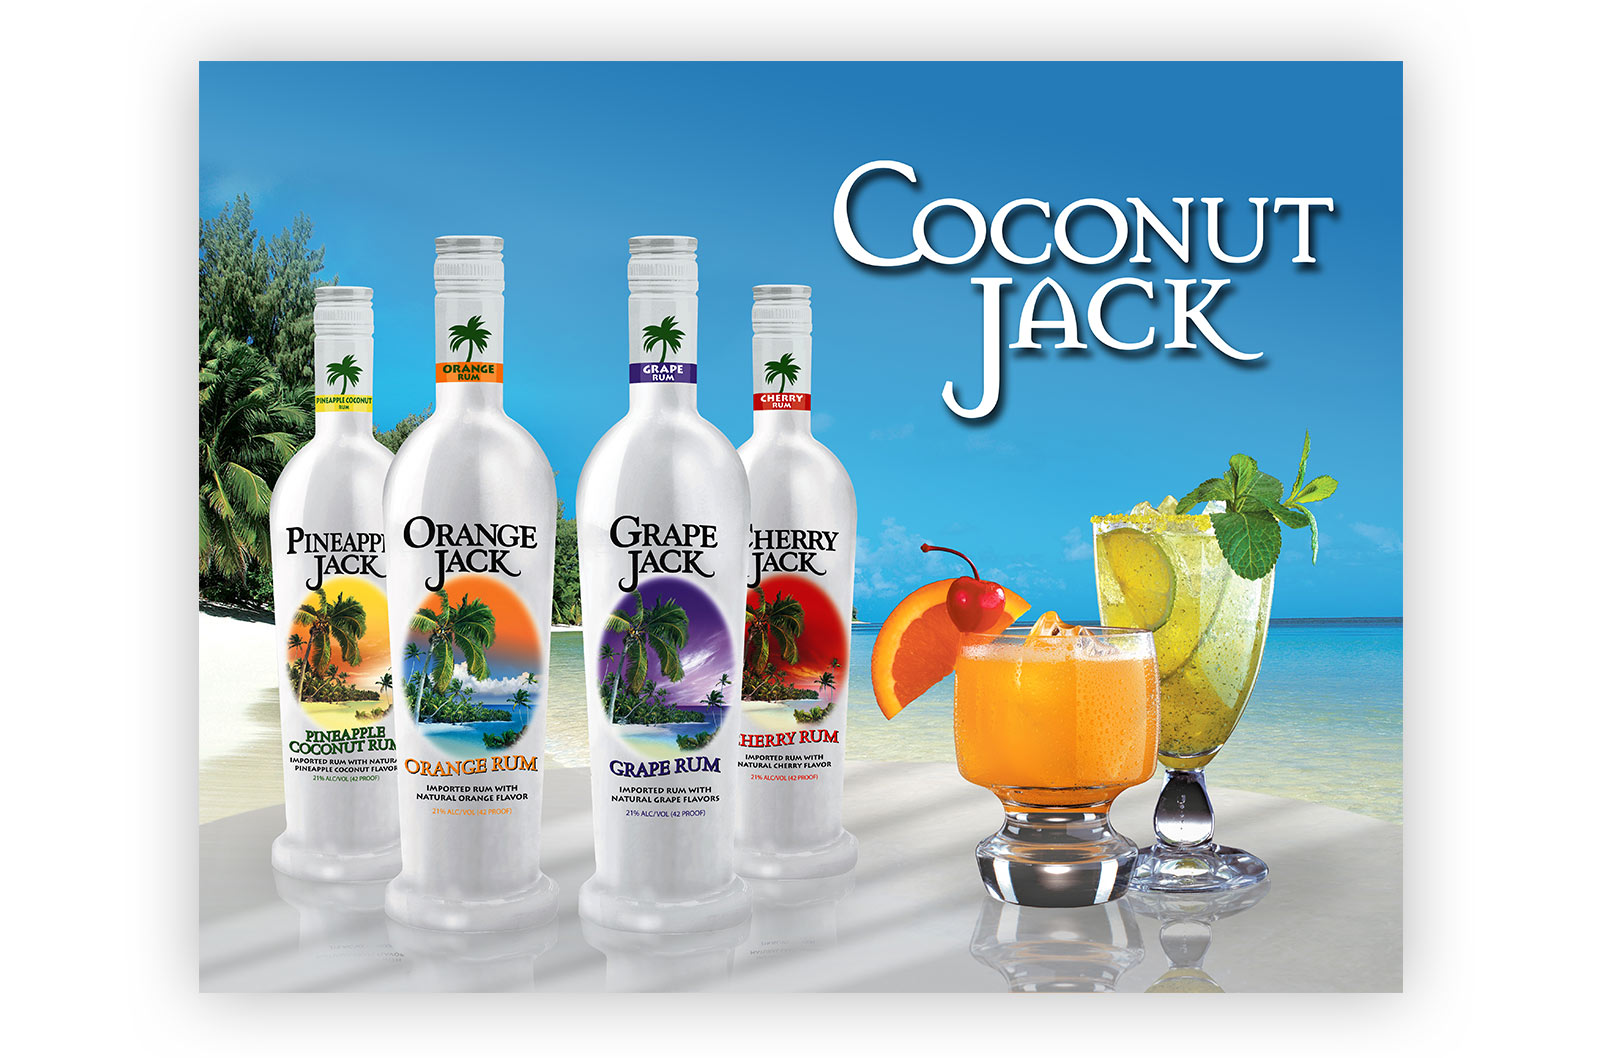 High-quality print and advertising for the spirits industry, depicting: Coconut Jack.